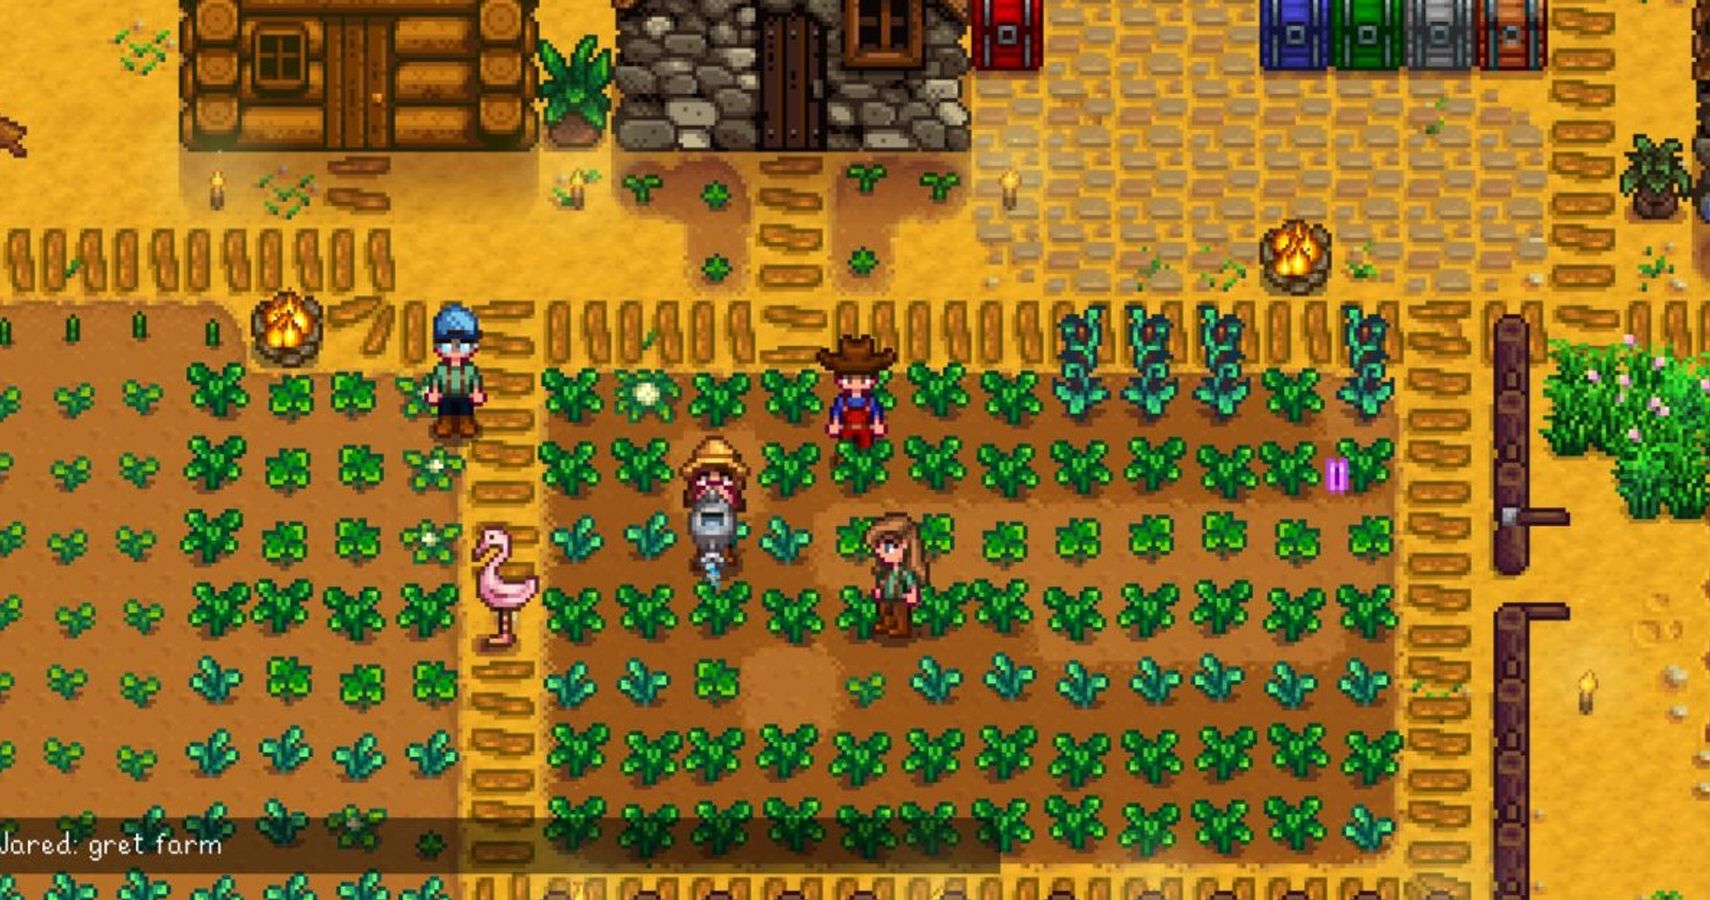 stardew-valley-multiplayer-beta-is-available-on-steam-here-s-how-to-get-in